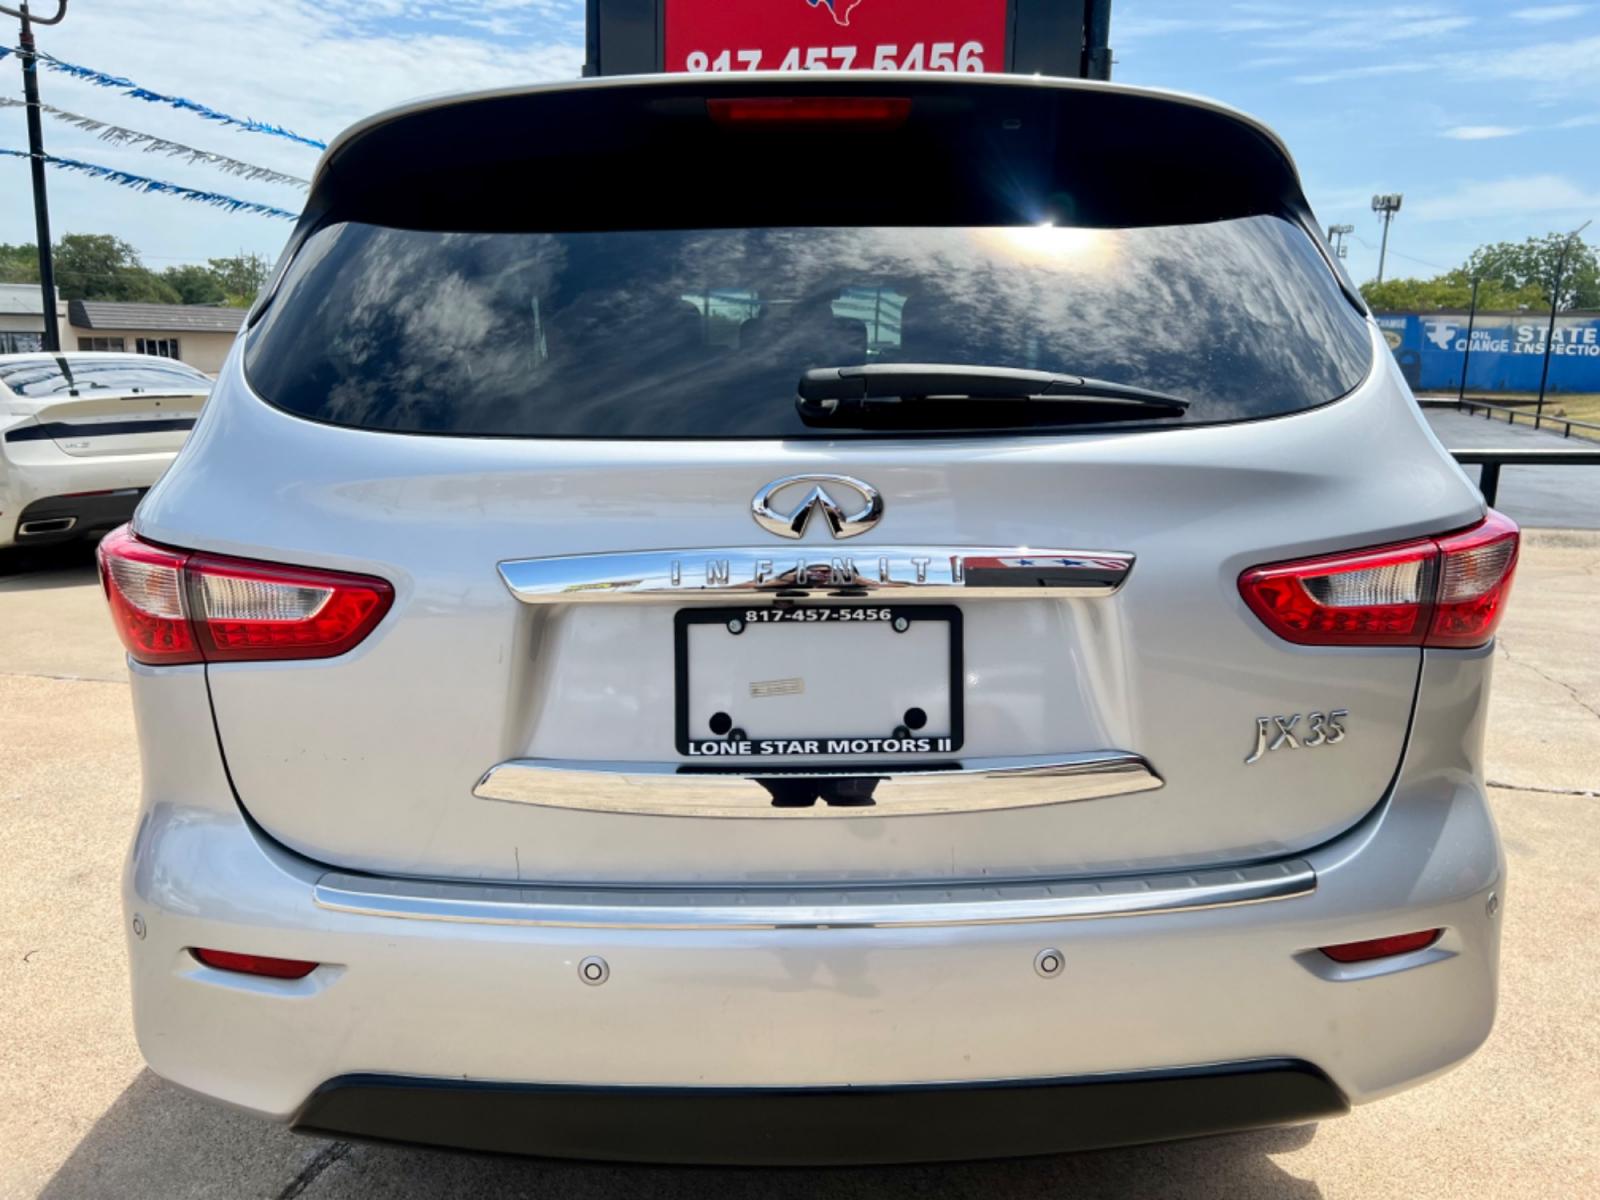 2013 SILVER INFINITI JX35 (5N1AL0MM3DC) , located at 5900 E. Lancaster Ave., Fort Worth, TX, 76112, (817) 457-5456, 0.000000, 0.000000 - This is a 2013 INFINITI JX35 4 DOOR SUV that is in excellent condition. There are no dents or scratches. The interior is clean with no rips or tears or stains. All power windows, door locks and seats. Ice cold AC for those hot Texas summer days. It is equipped with a CD player, AM/FM radio, AUX port - Photo #5